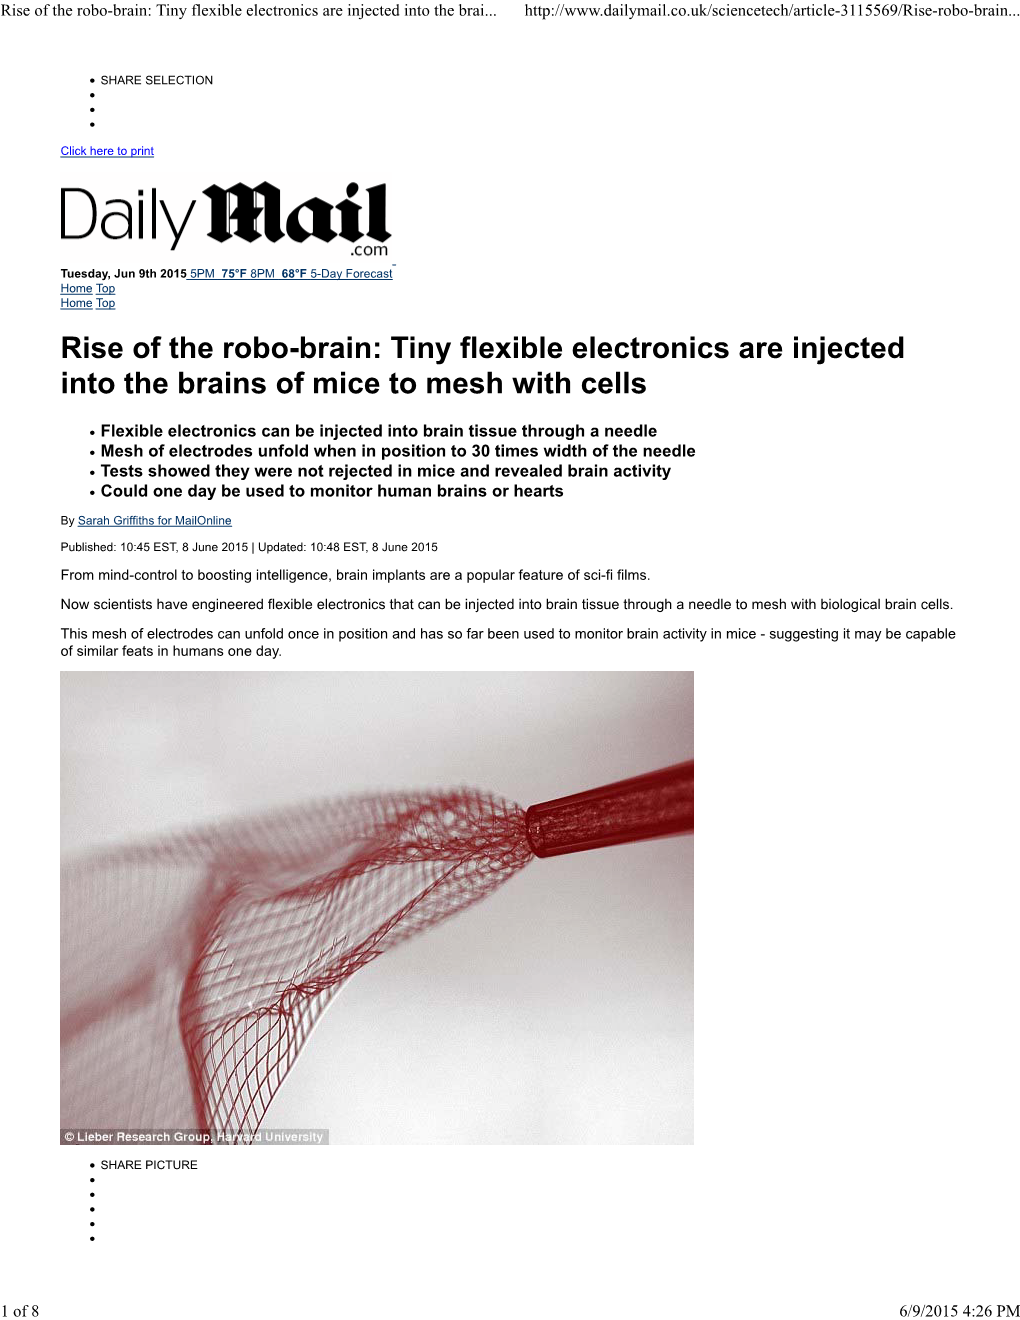 Rise of the Robo-Brain: Tiny Flexible Electronics Are Injected Into the Brai